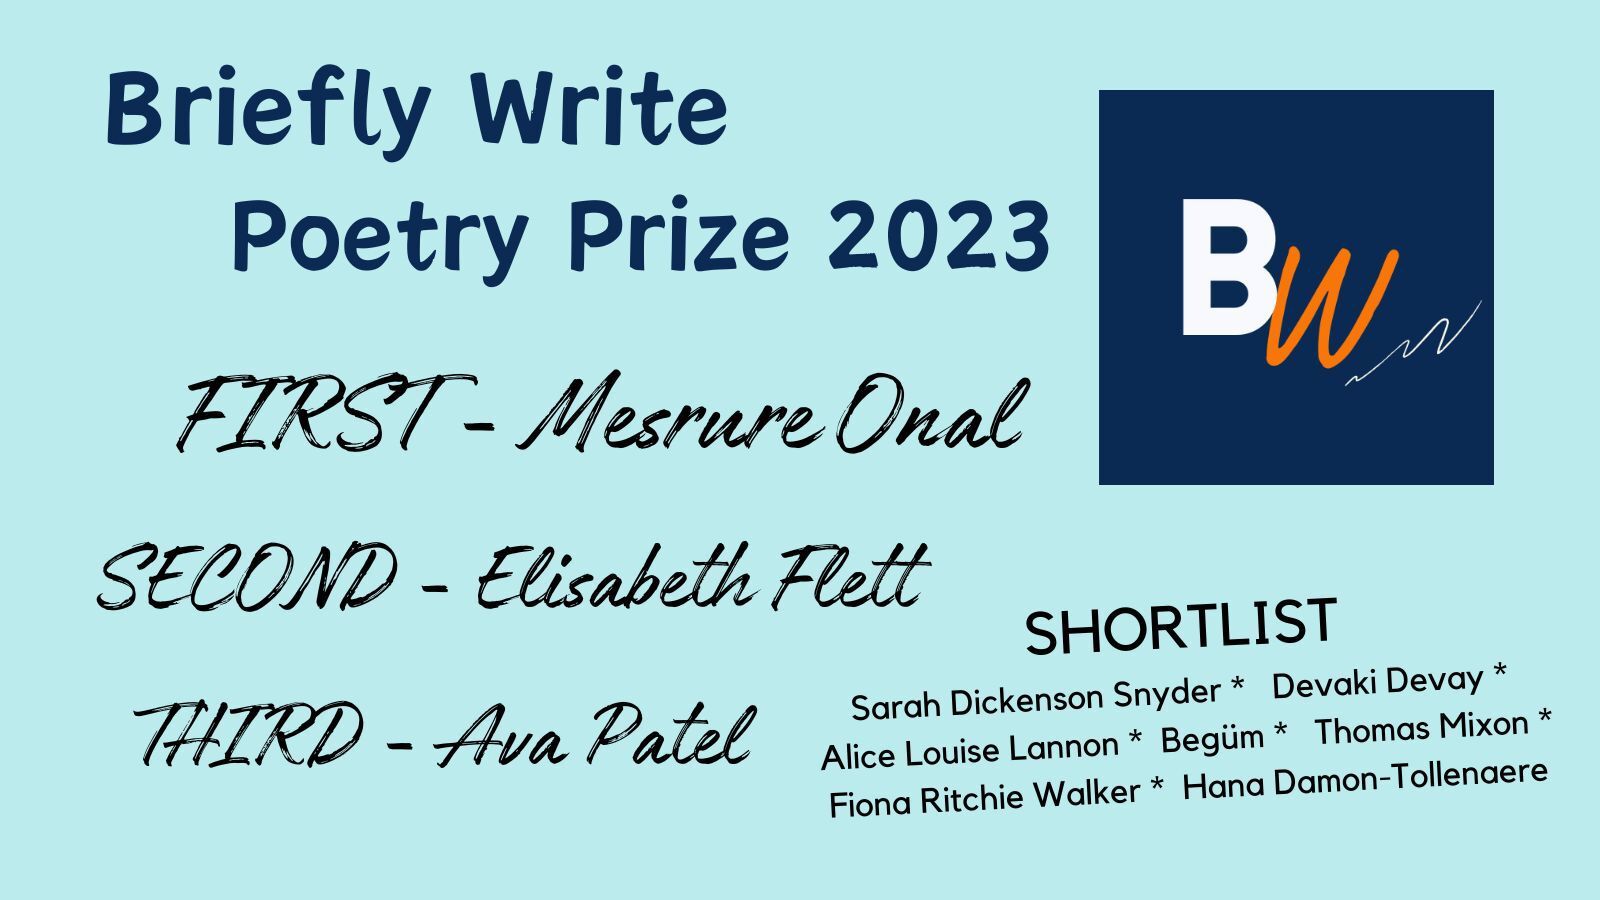 Briefly Write Poetry Prize results - out now!